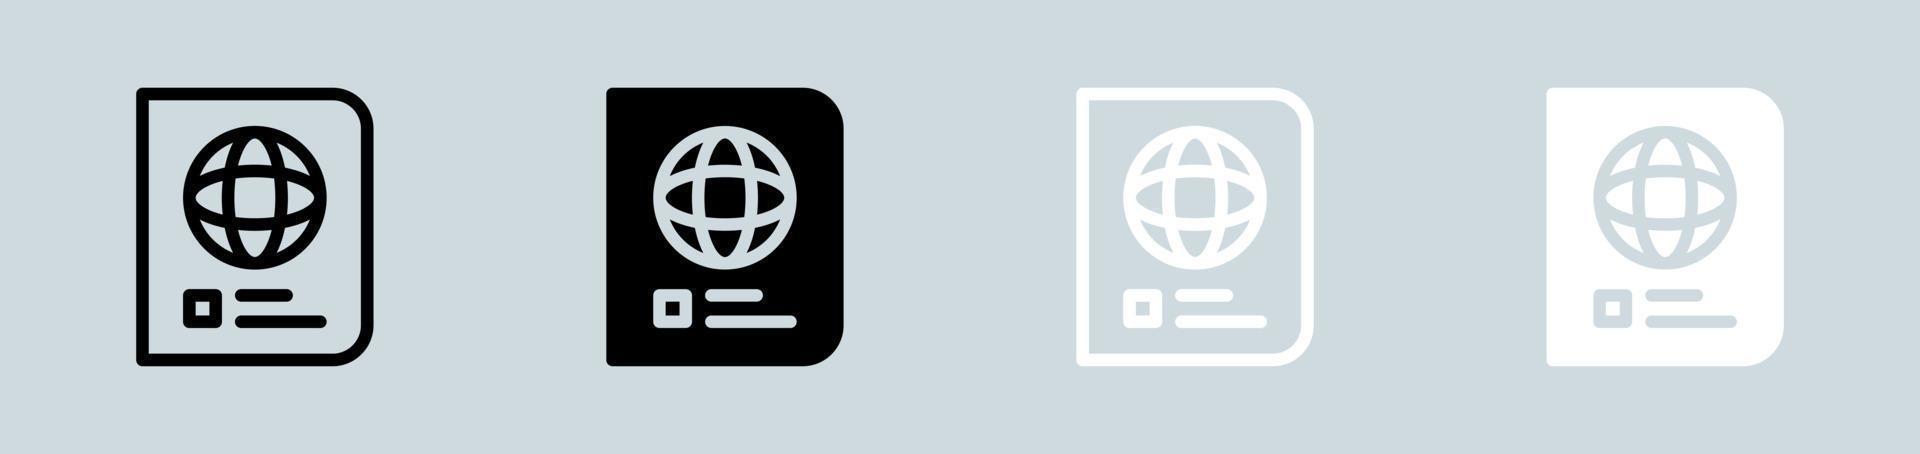 Passport icon set in black and white. Immigration signs vector illustration.